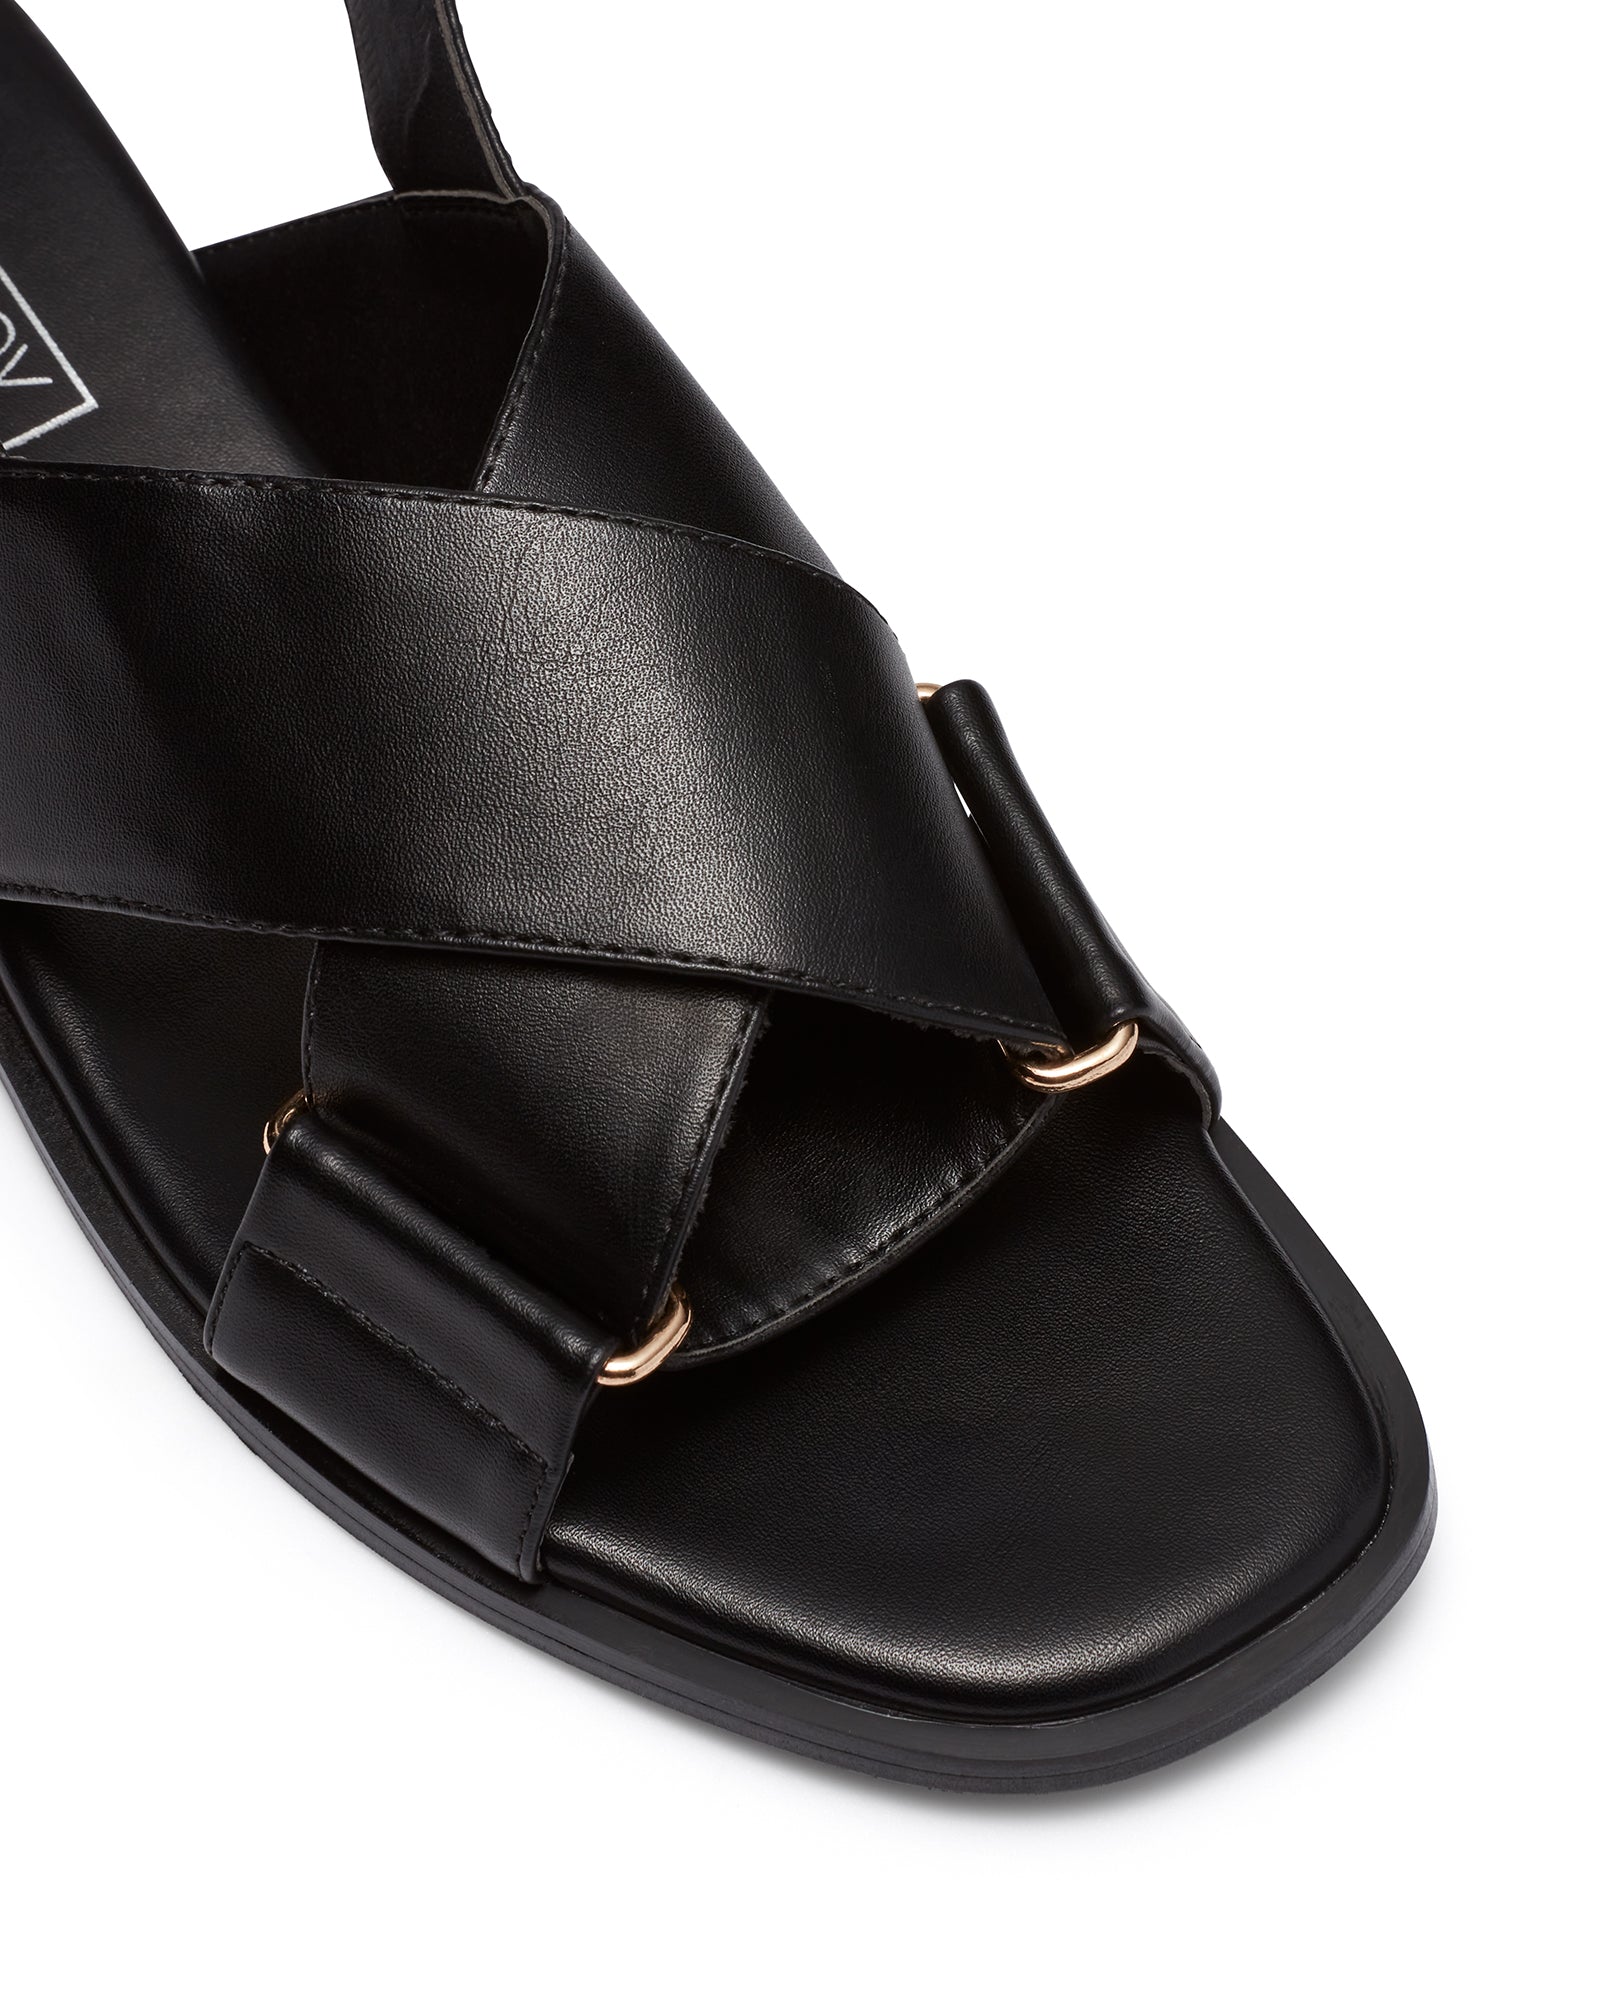 Therapy Shoes Sabine Black | Women's Sandals | Flats | Cross Over Strap